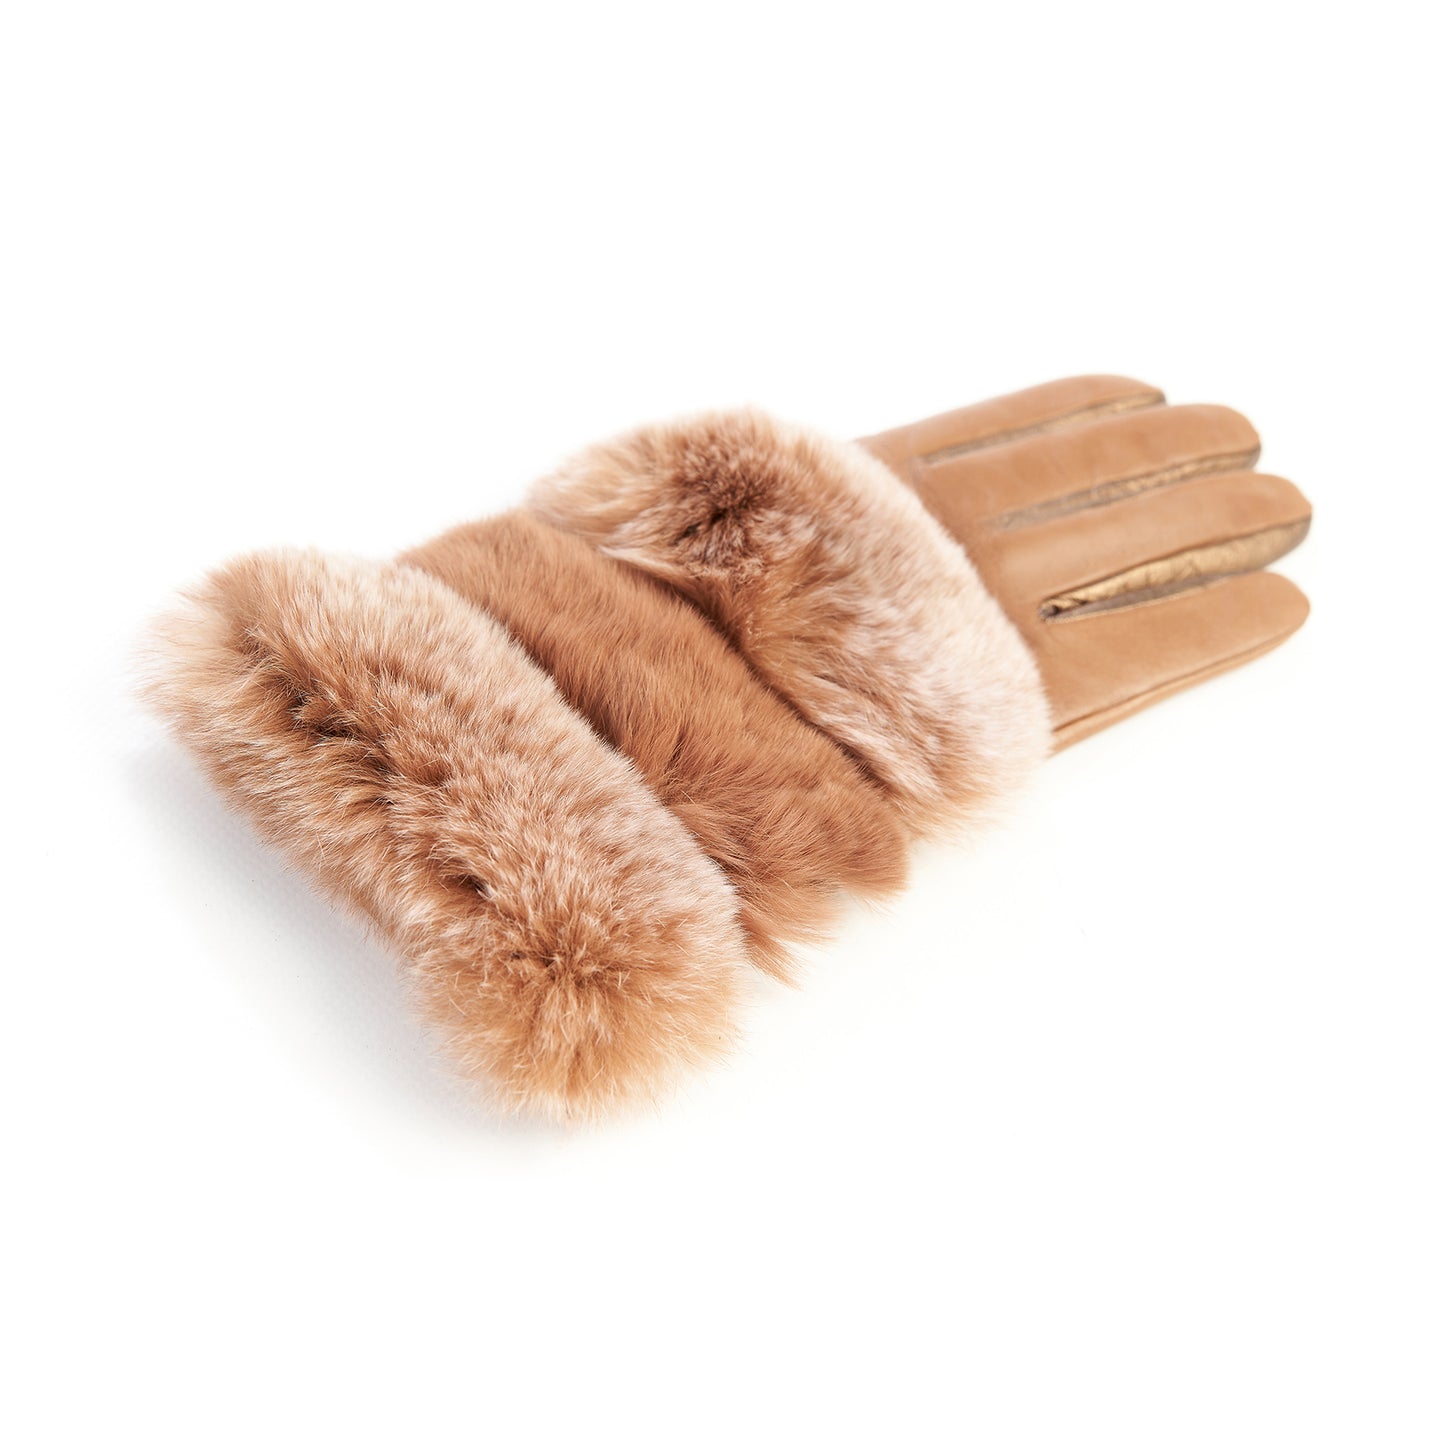 Women's gloves in cognac and bronze nappa leather with natural fur